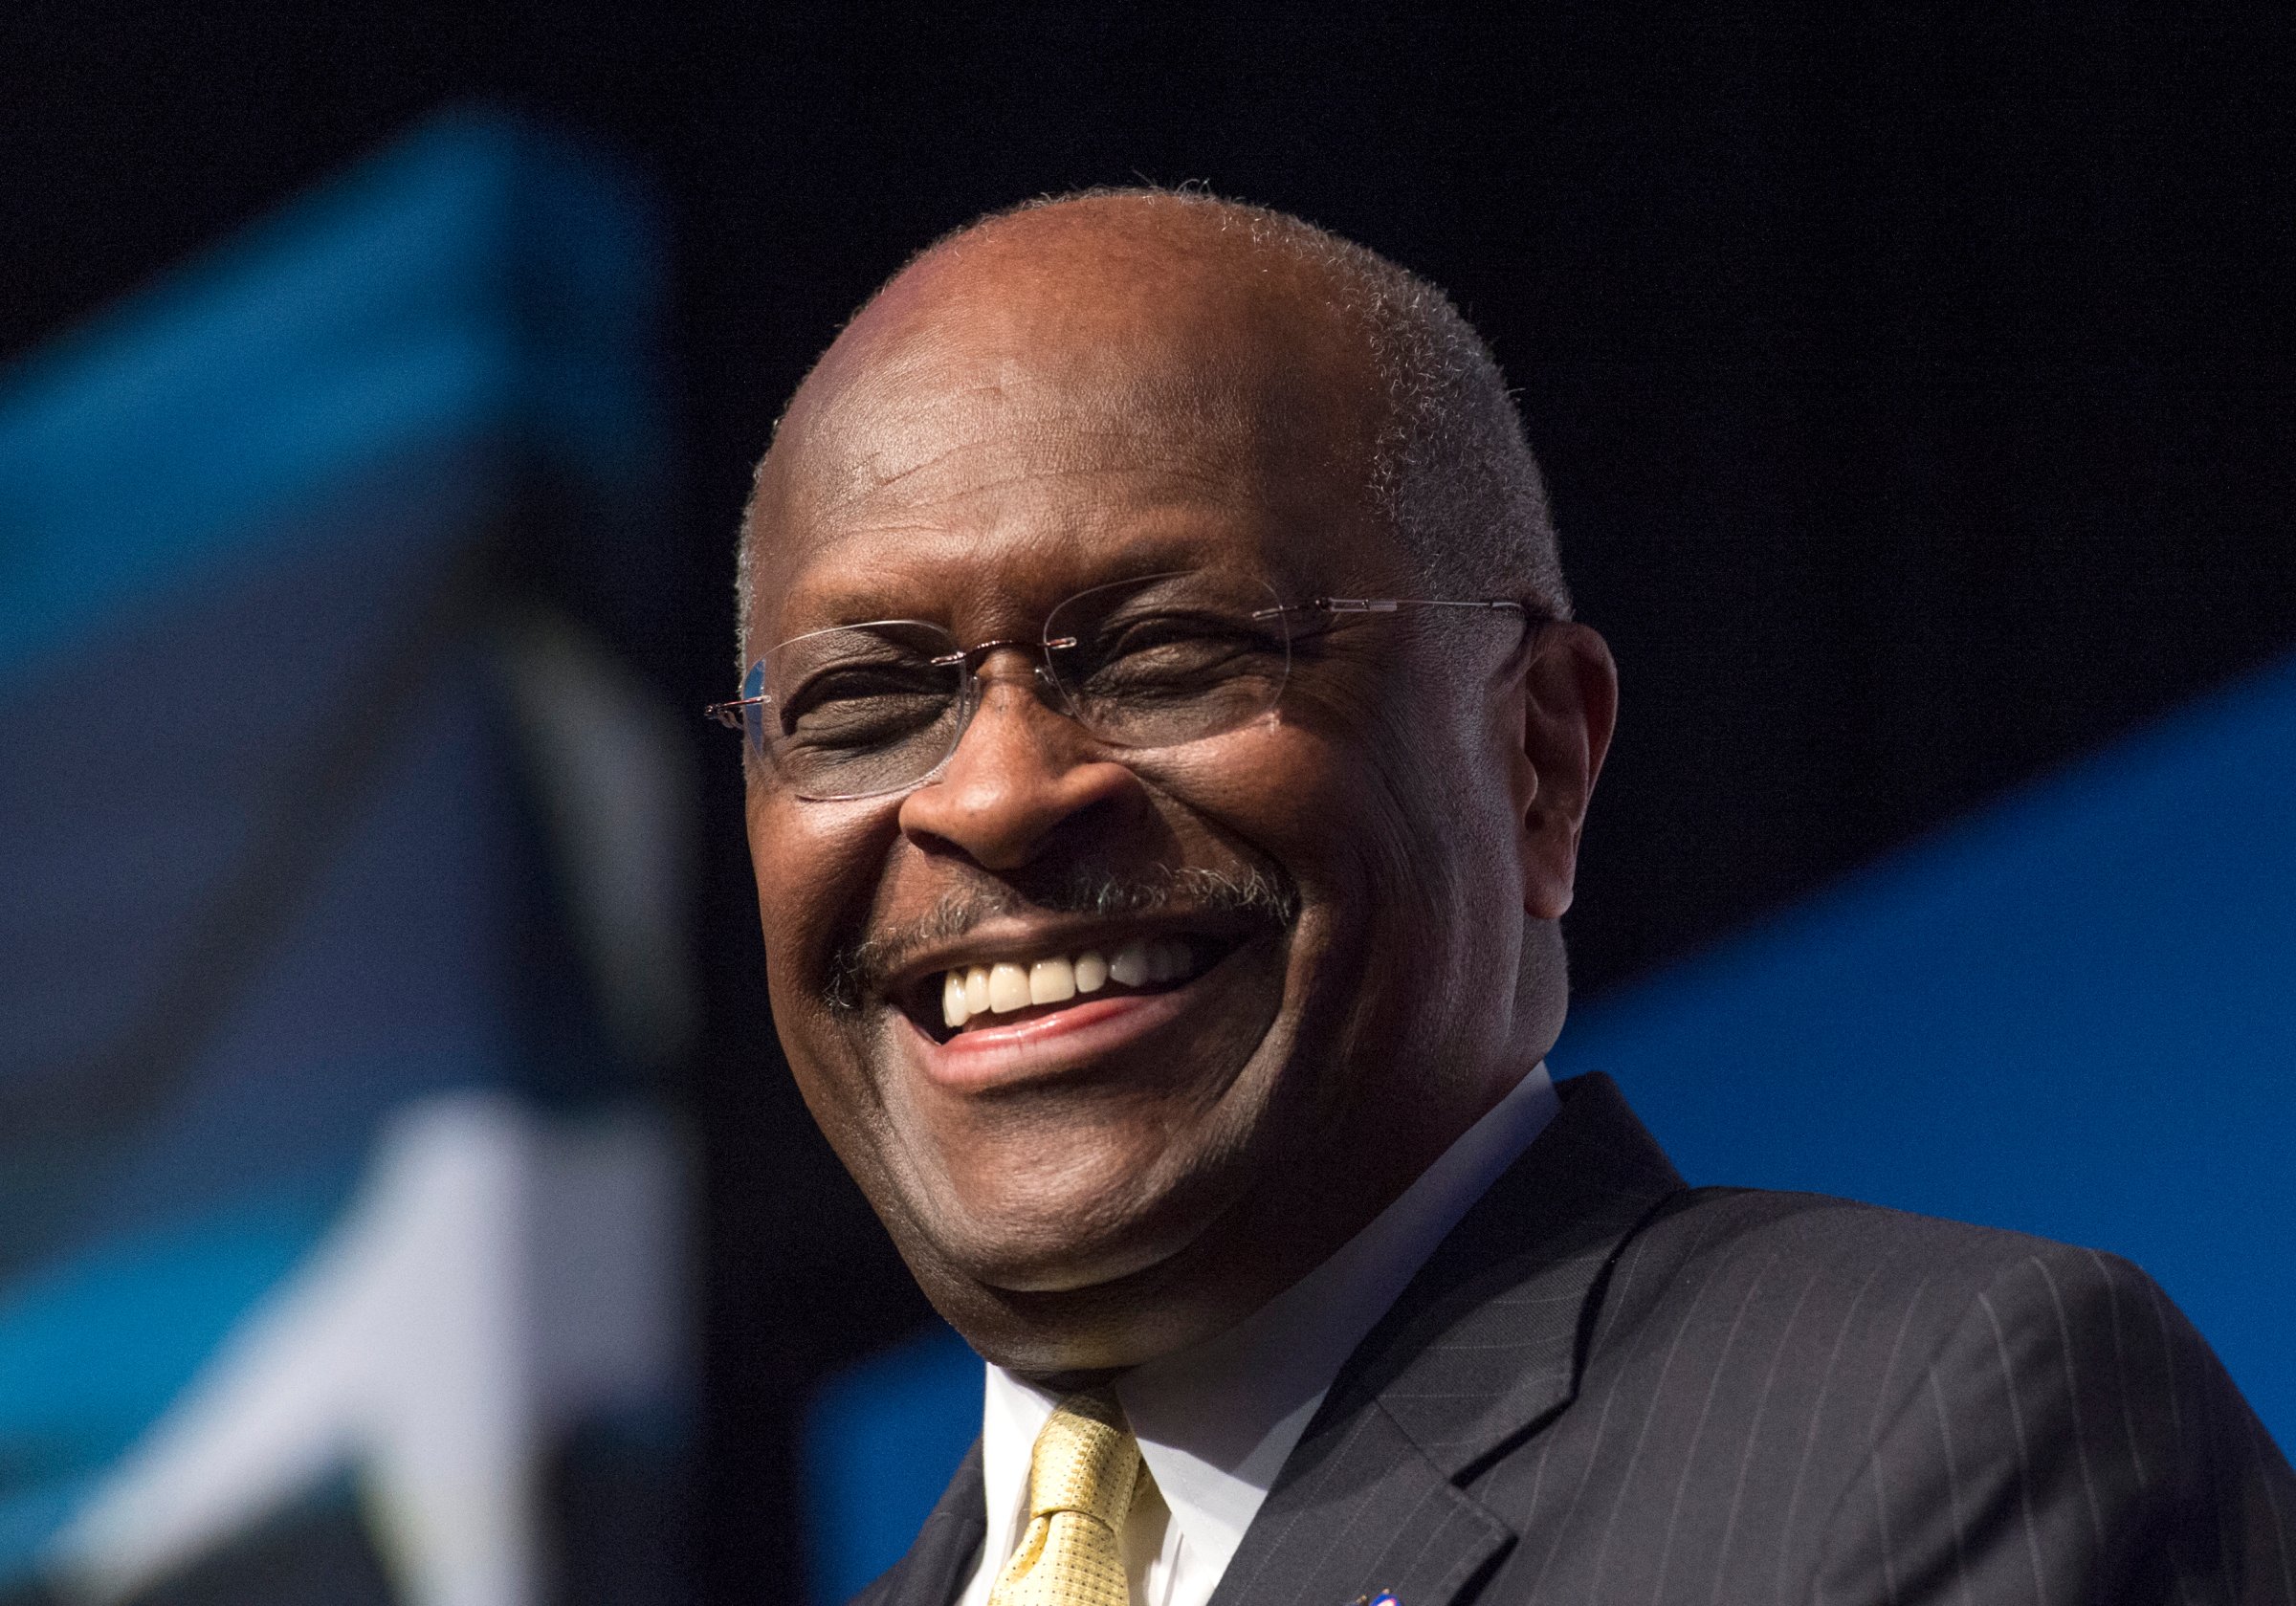 Herman Cain speaks during Faith and Freedom Coalition's Road to Majority event